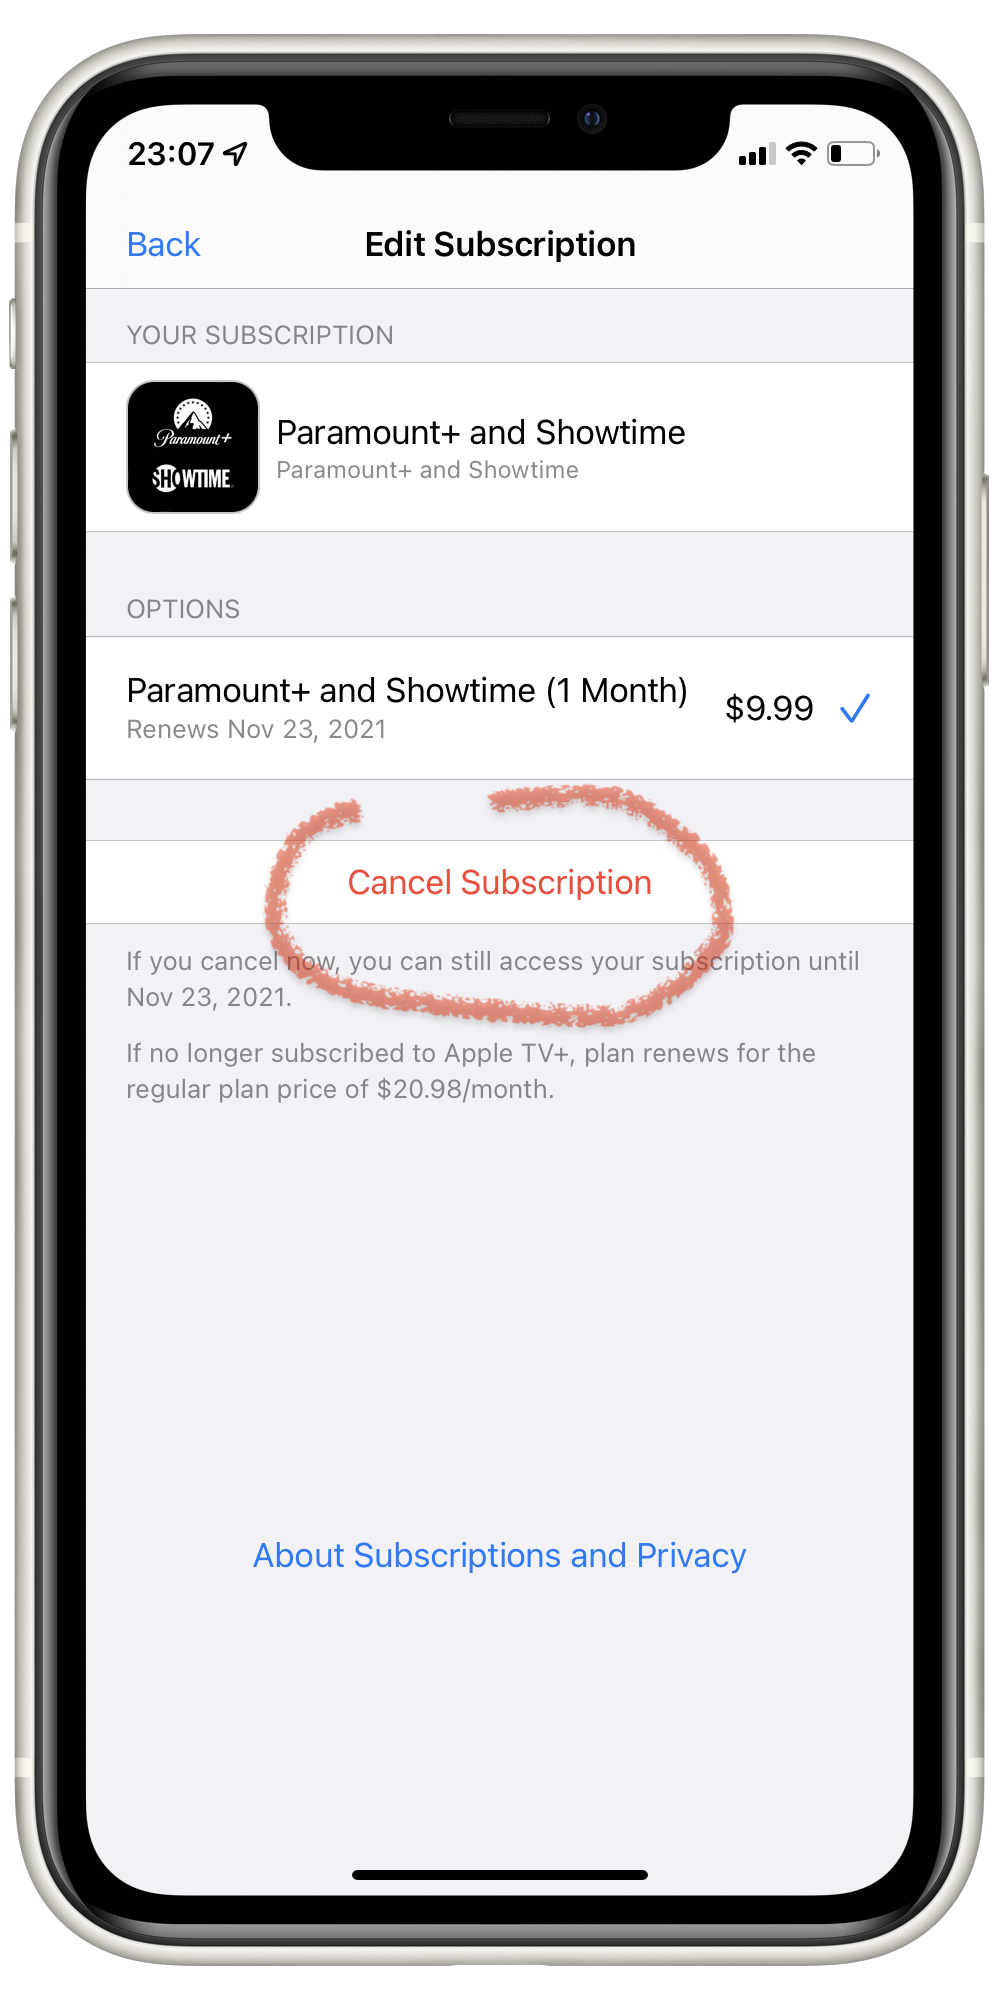 The Edit Subscription page in the settings app. The Cancel Subscription button shows up in prominent, red text. The current subscription renewal/expiration date is also clearly visible.